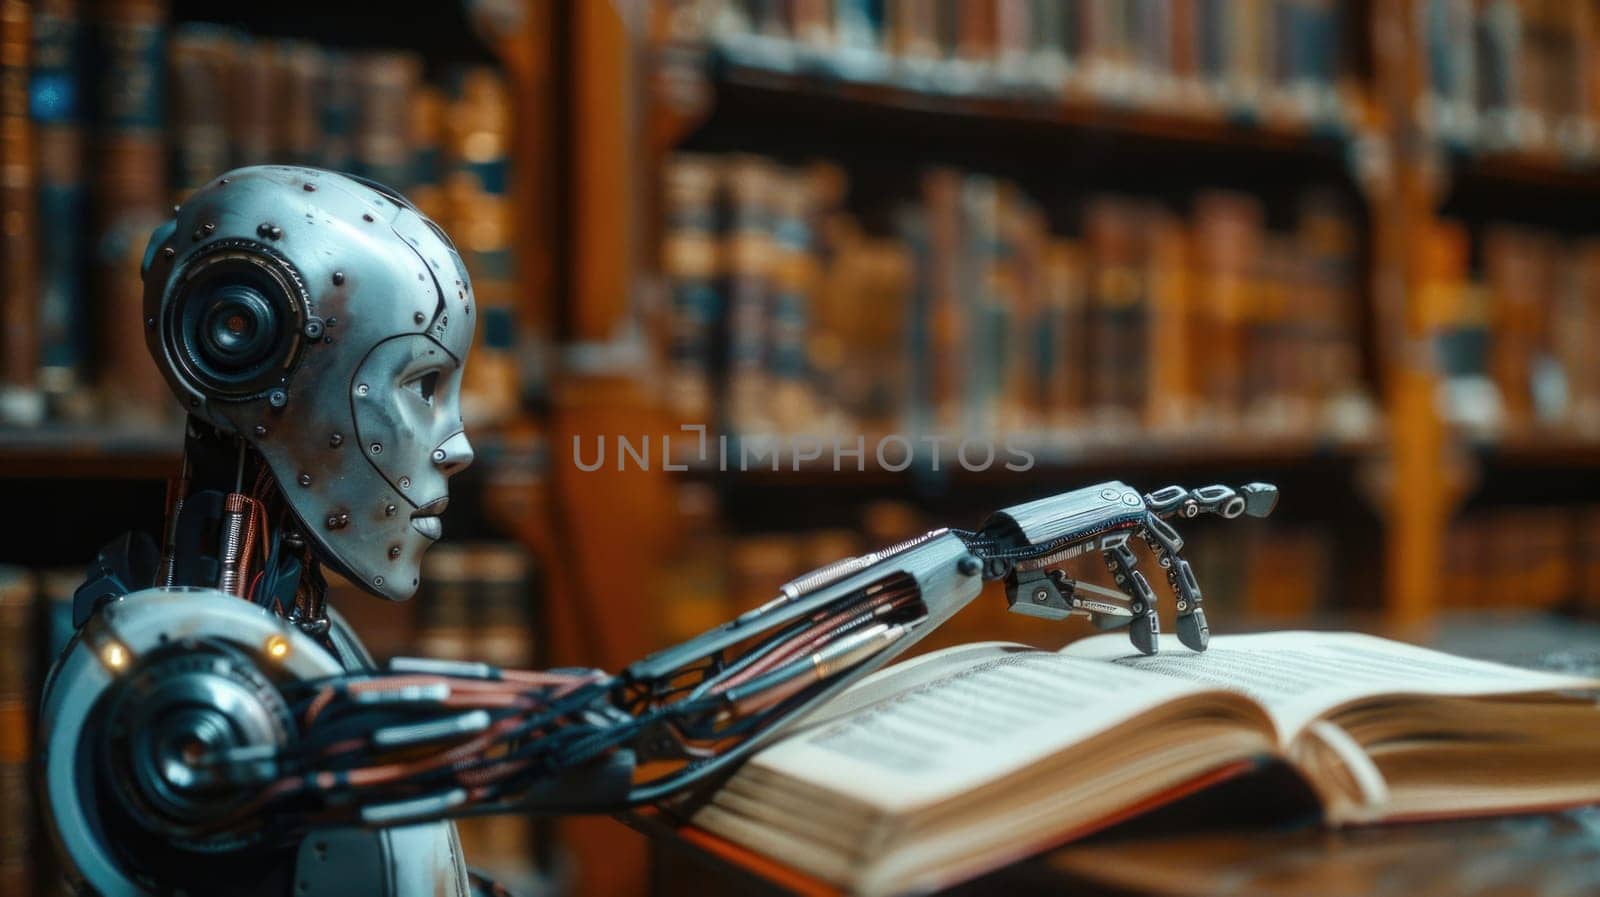 A robot immersed in a book within a library setting.